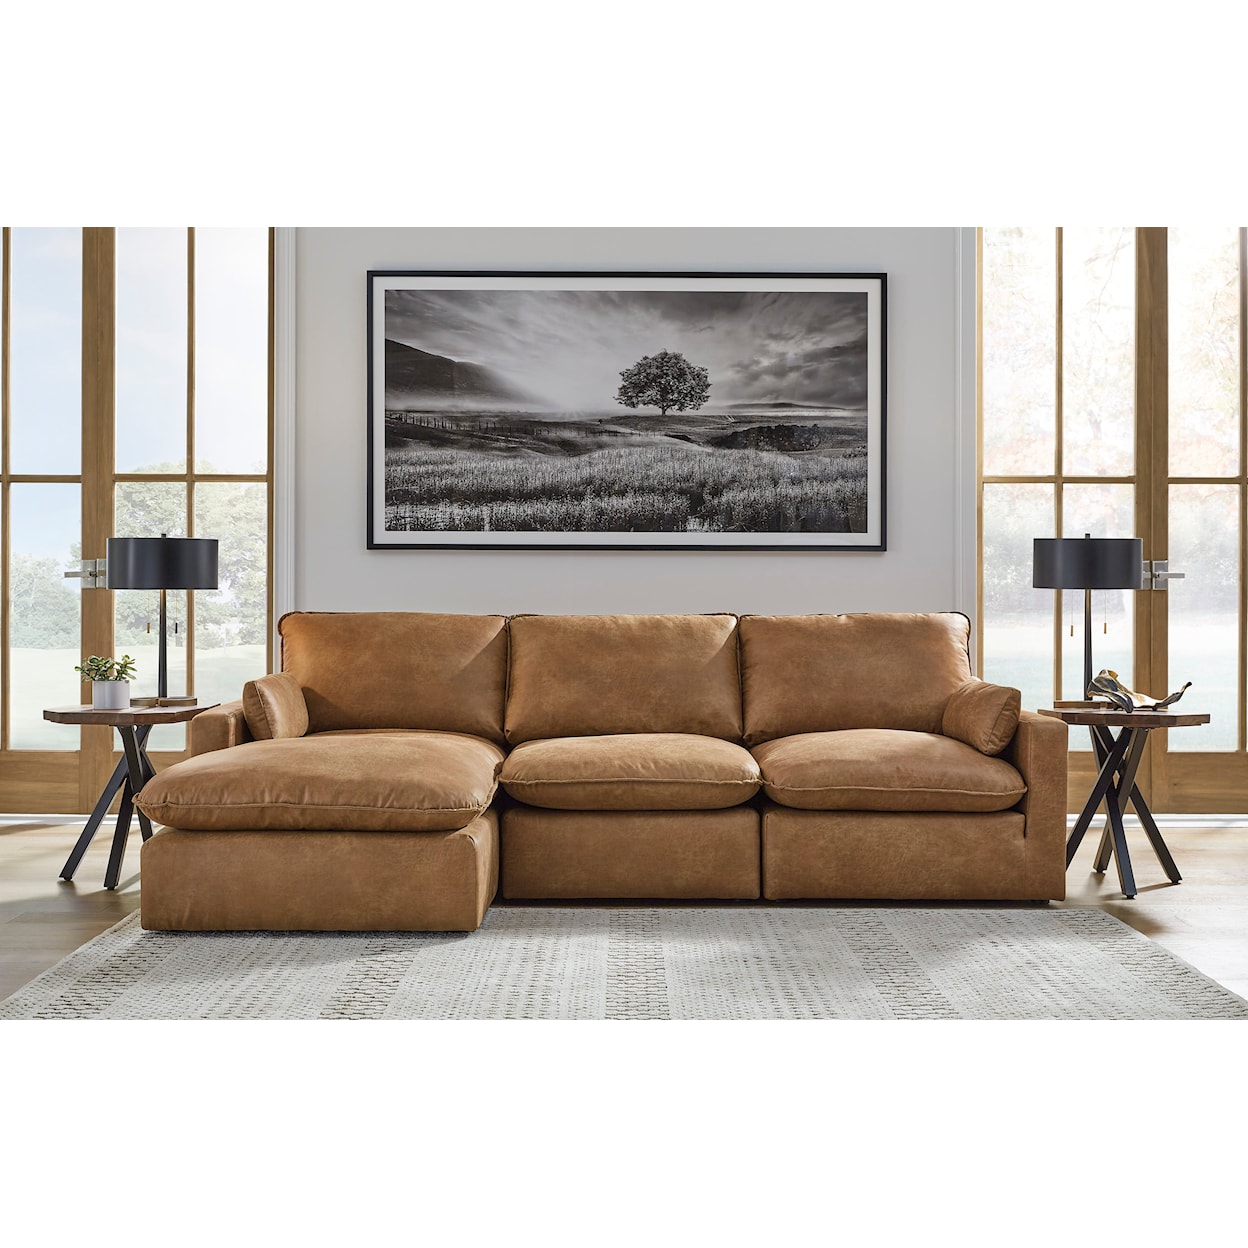 Benchcraft Marlaina 3-Piece Sectional with Chaise